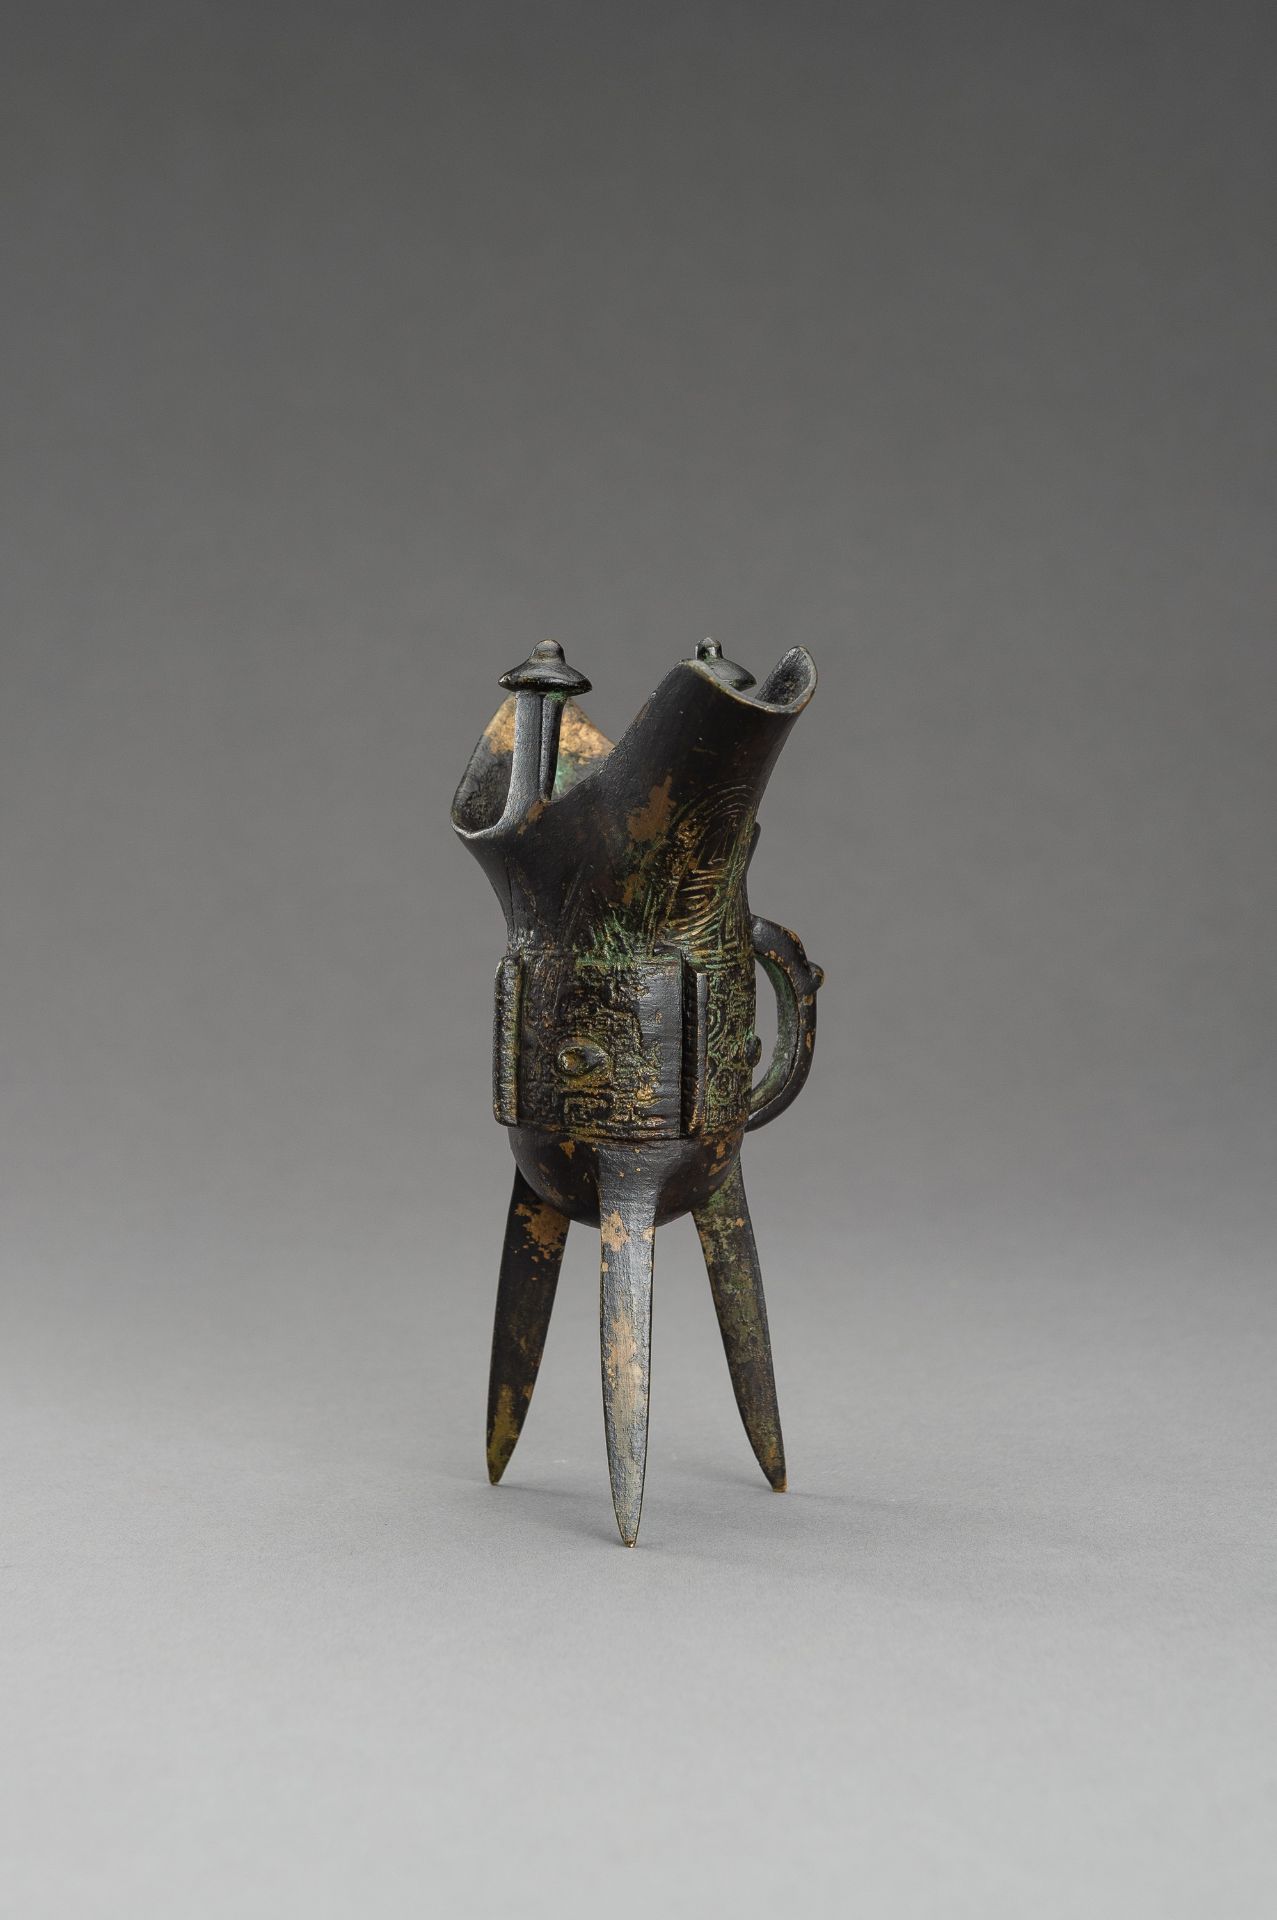 AN ARCHAISTIC SHANG STYLE BRONZE RITUAL TRIPOD WINE VESSEL, JUE - Image 3 of 8